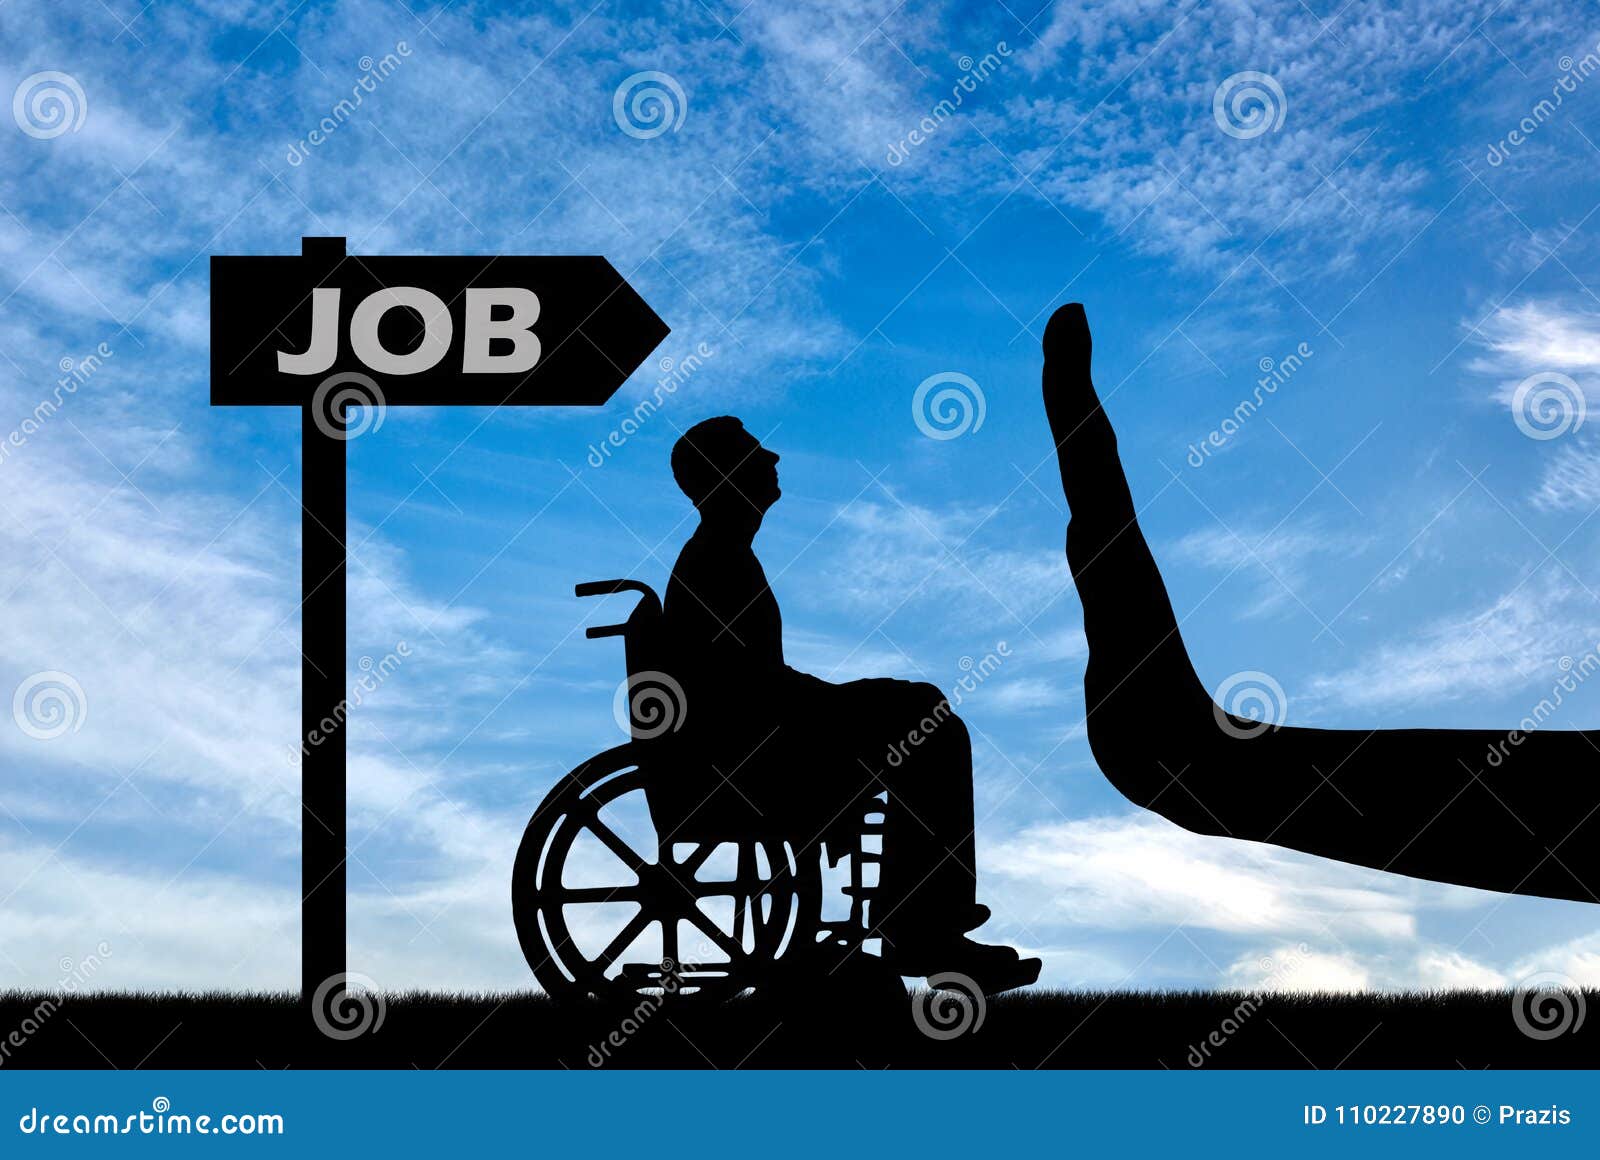 concept of discrimination in employment of people with disabilities